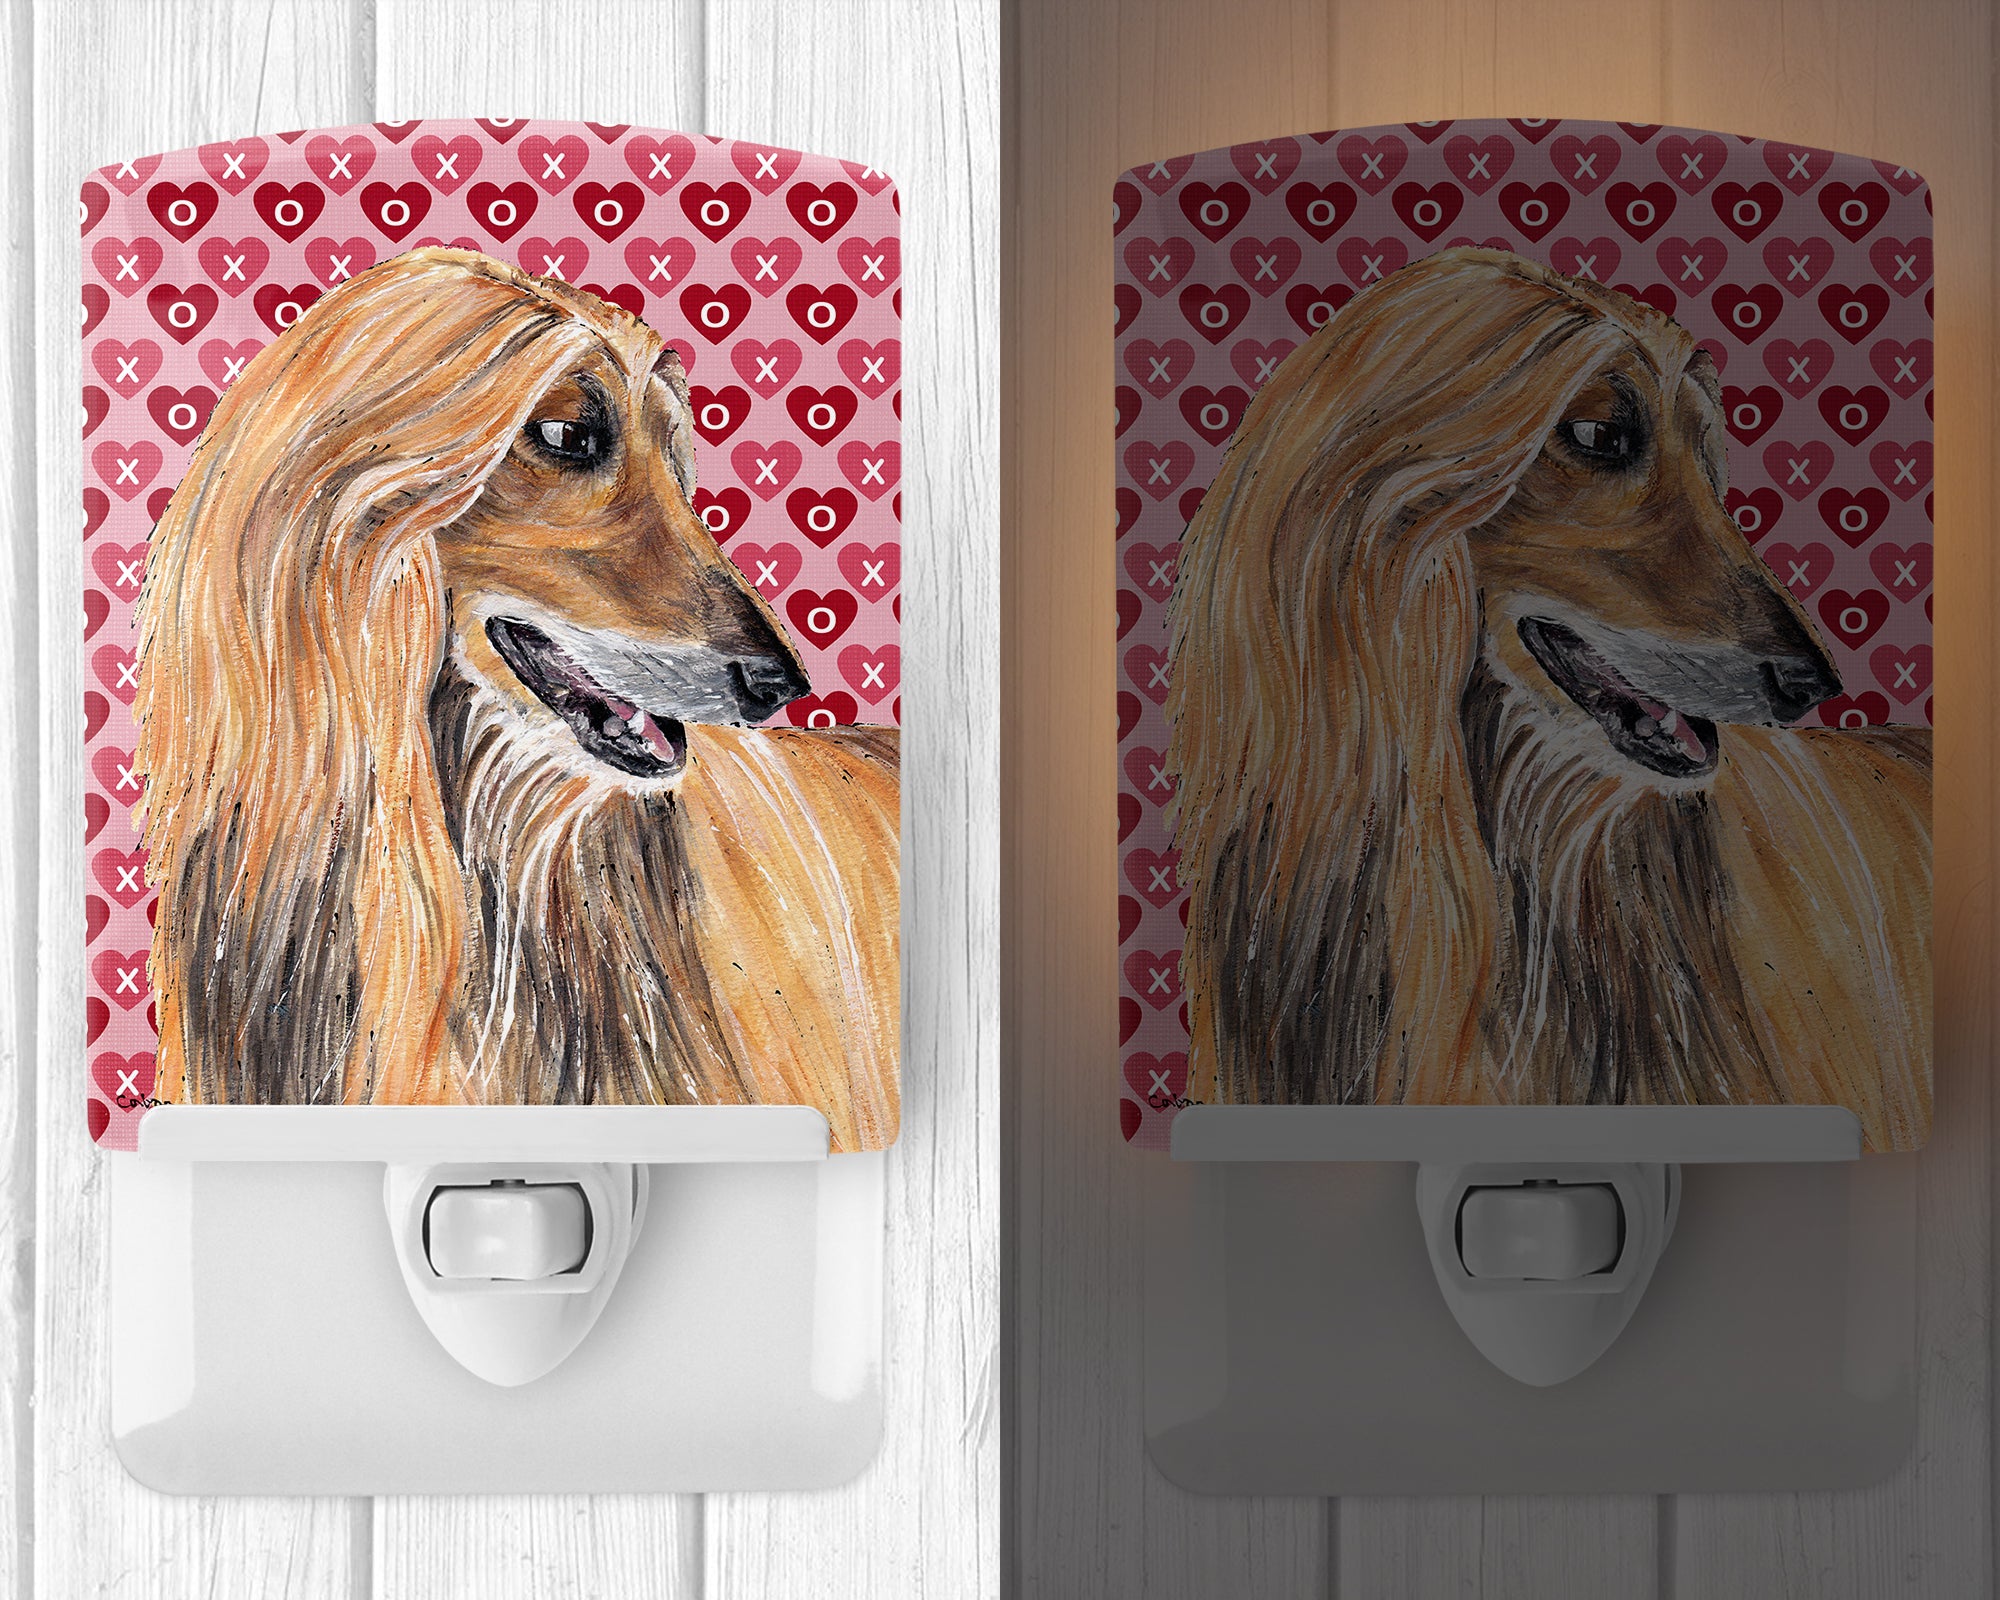 Afghan Hound Hearts Love and Valentine's Day Ceramic Night Light SC9503CNL - the-store.com